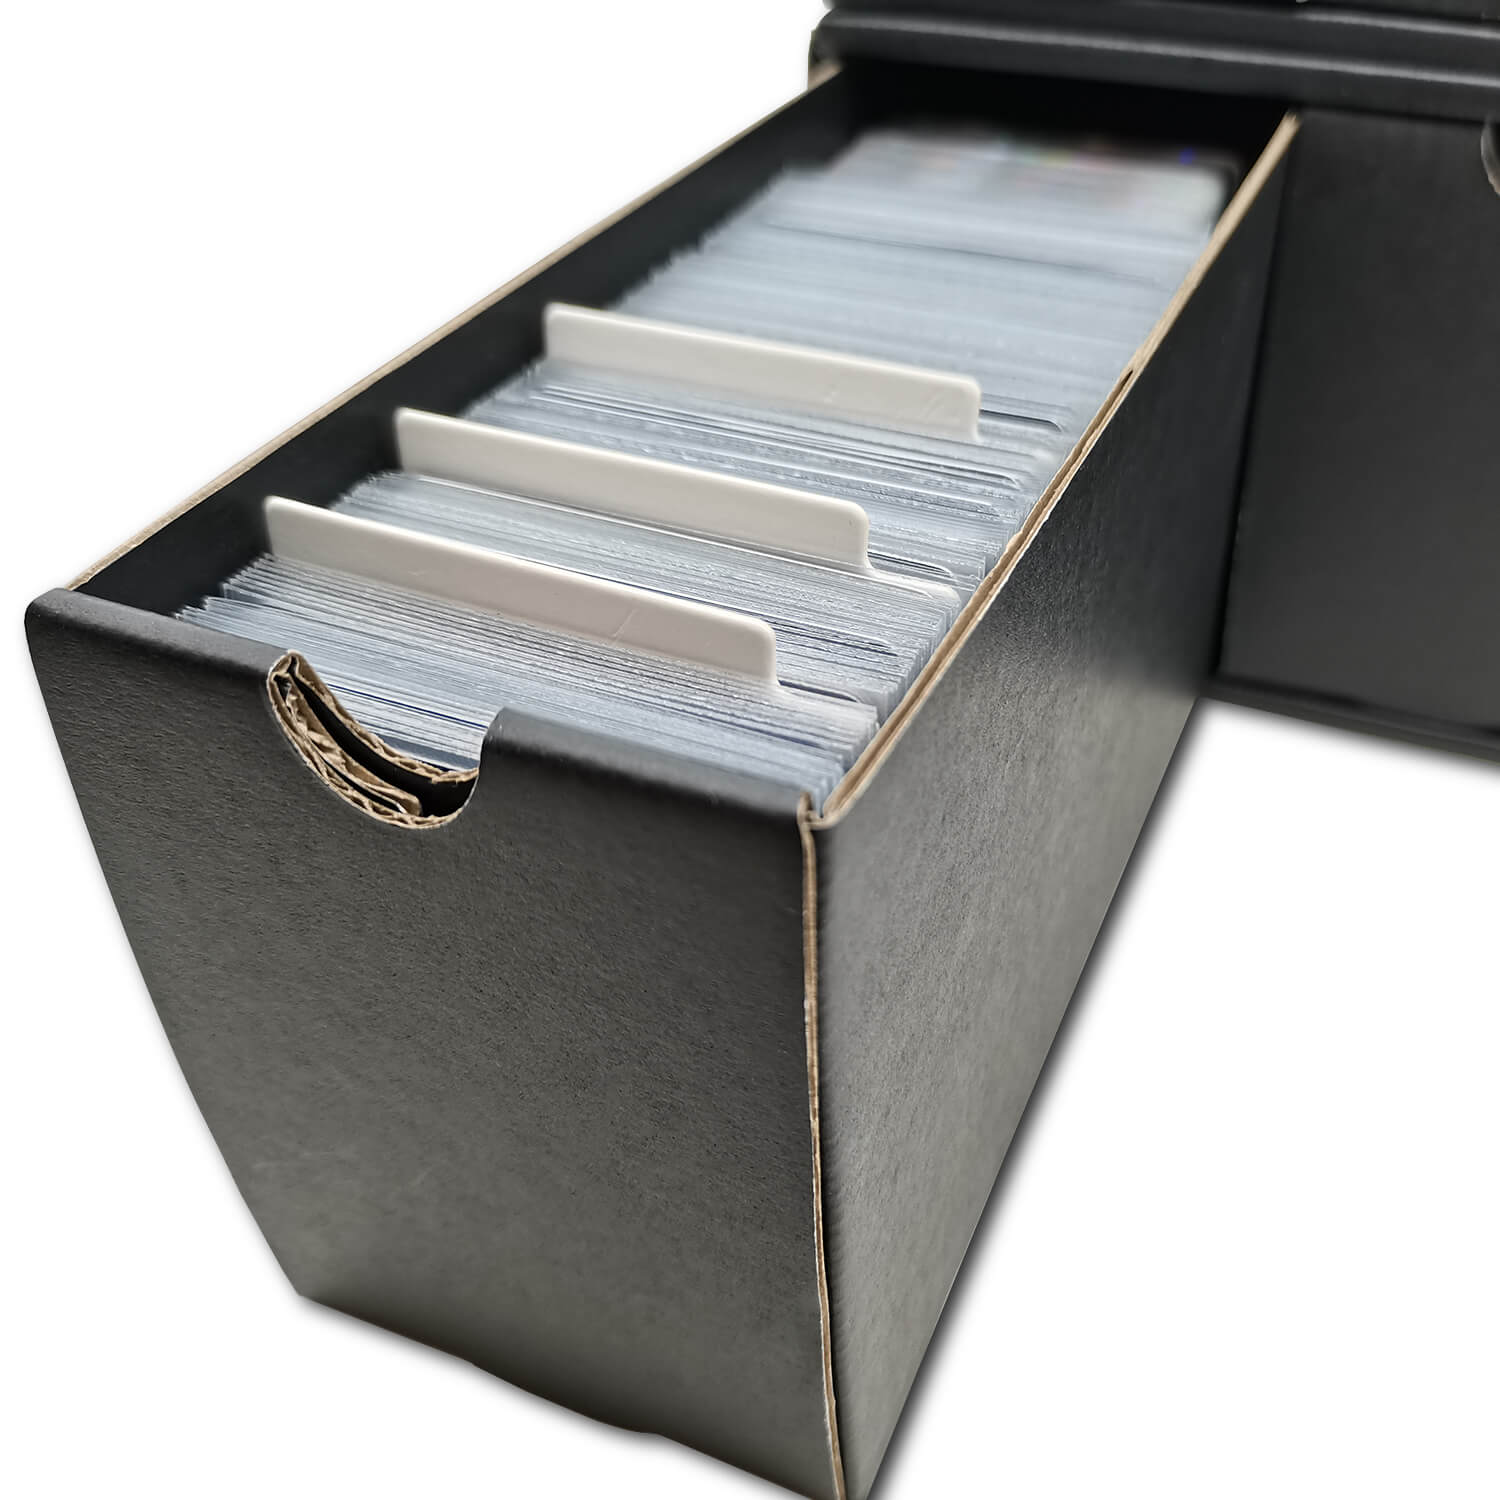 Fageverld trading card storage box with card dividers, 8 count